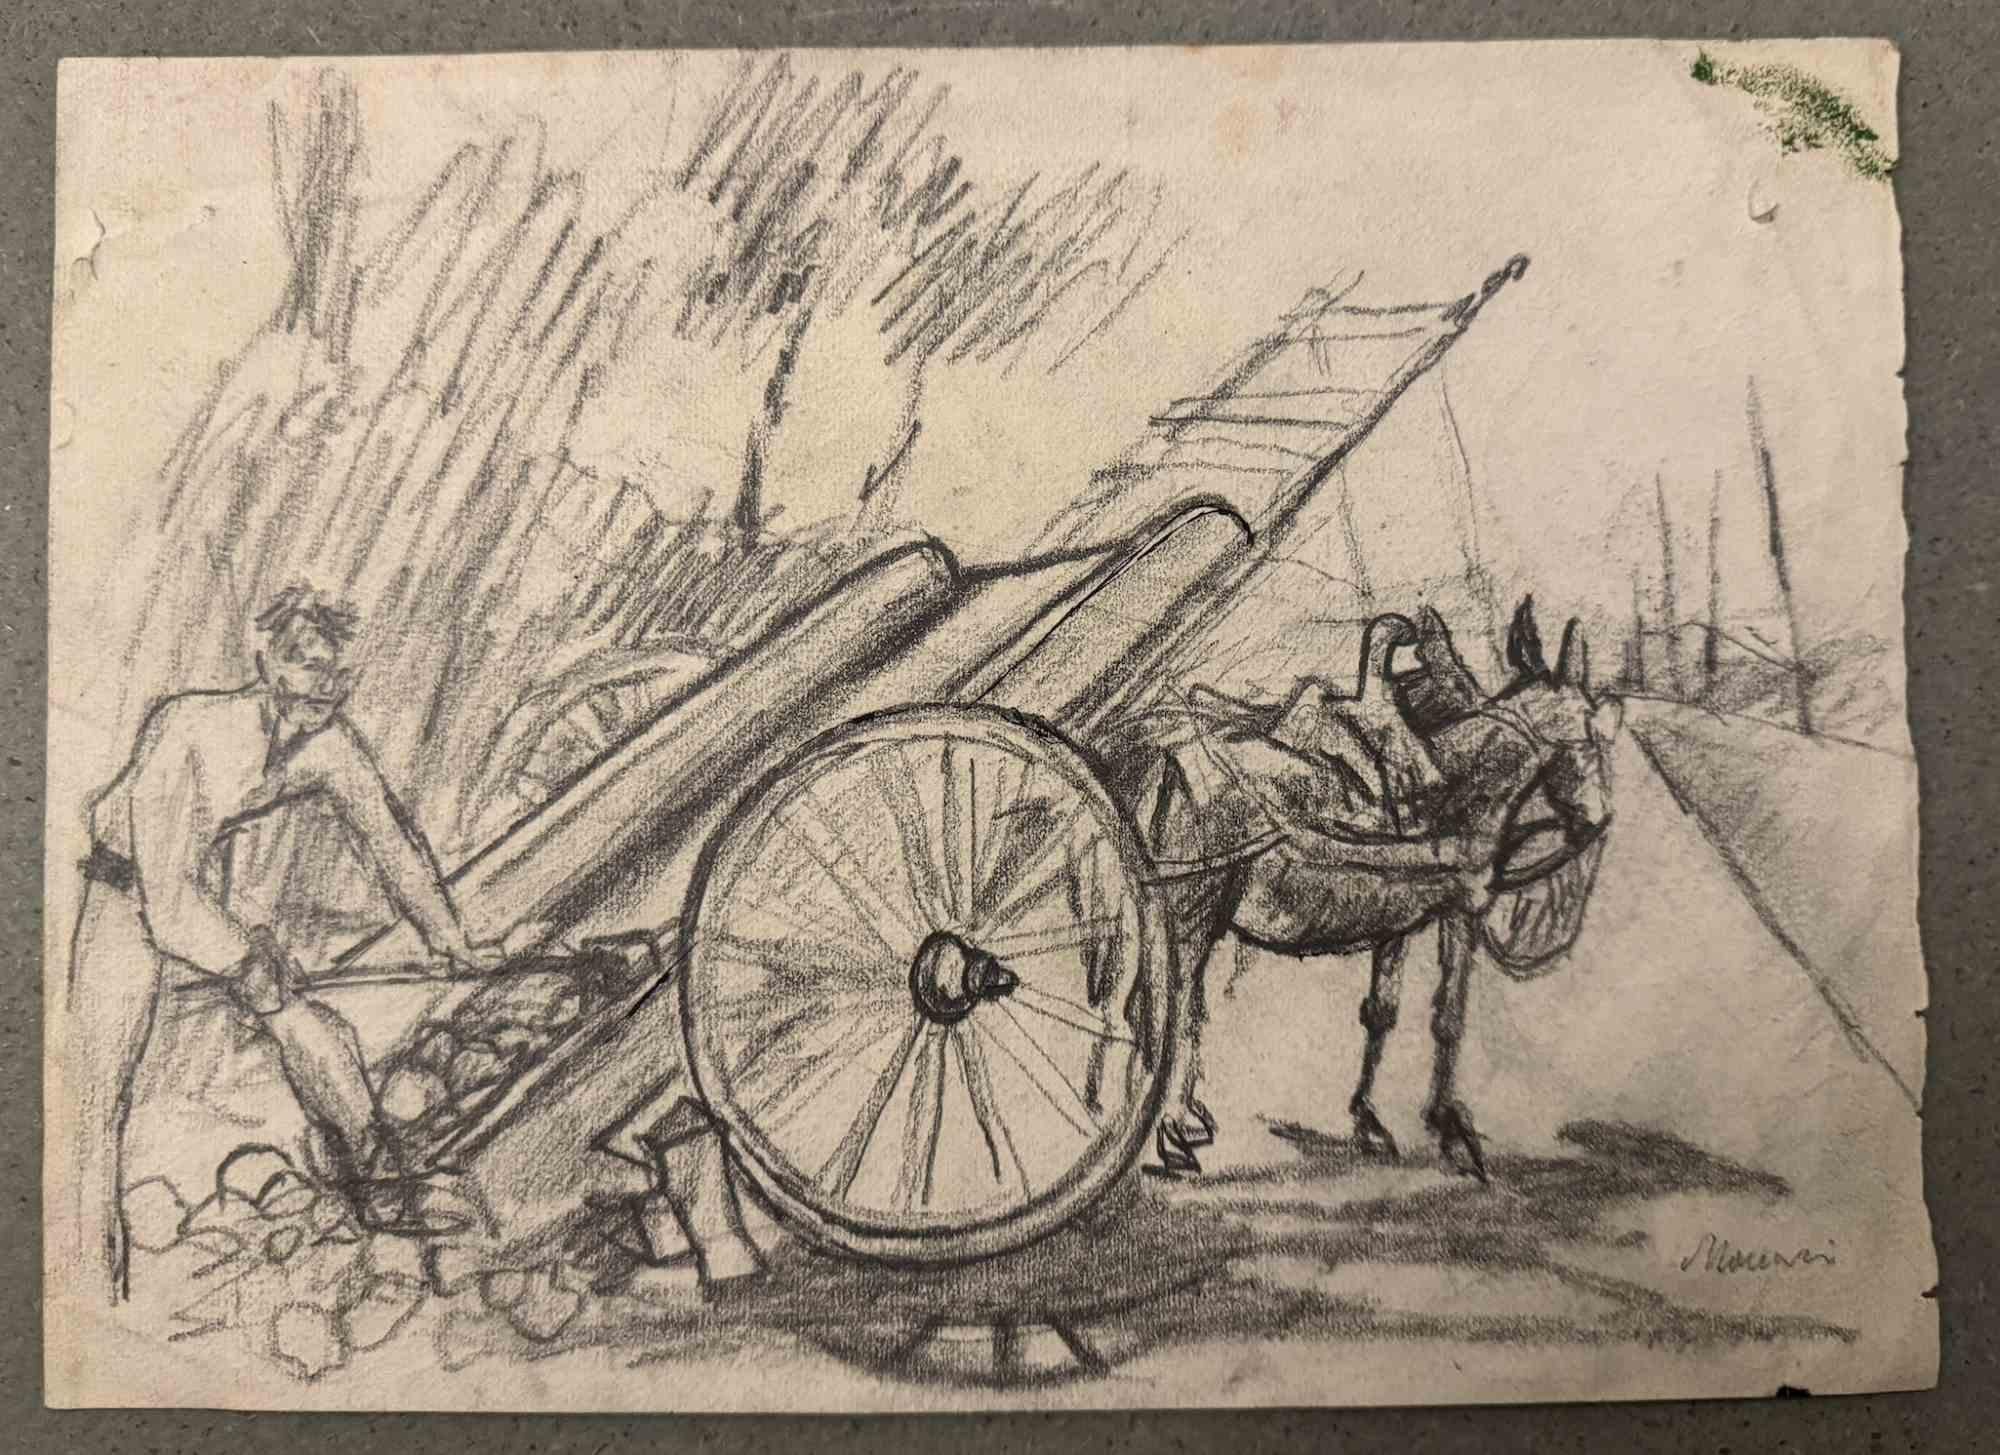 Carriage is a charcoal drawing realized by Mino Maccari  (1924-1989) in the Mid-20th Century.

Hand-signed.

Good conditions with slight foxing.

Mino Maccari (Siena, 1924-Rome, June 16, 1989) was an Italian writer, painter, engraver and journalist,